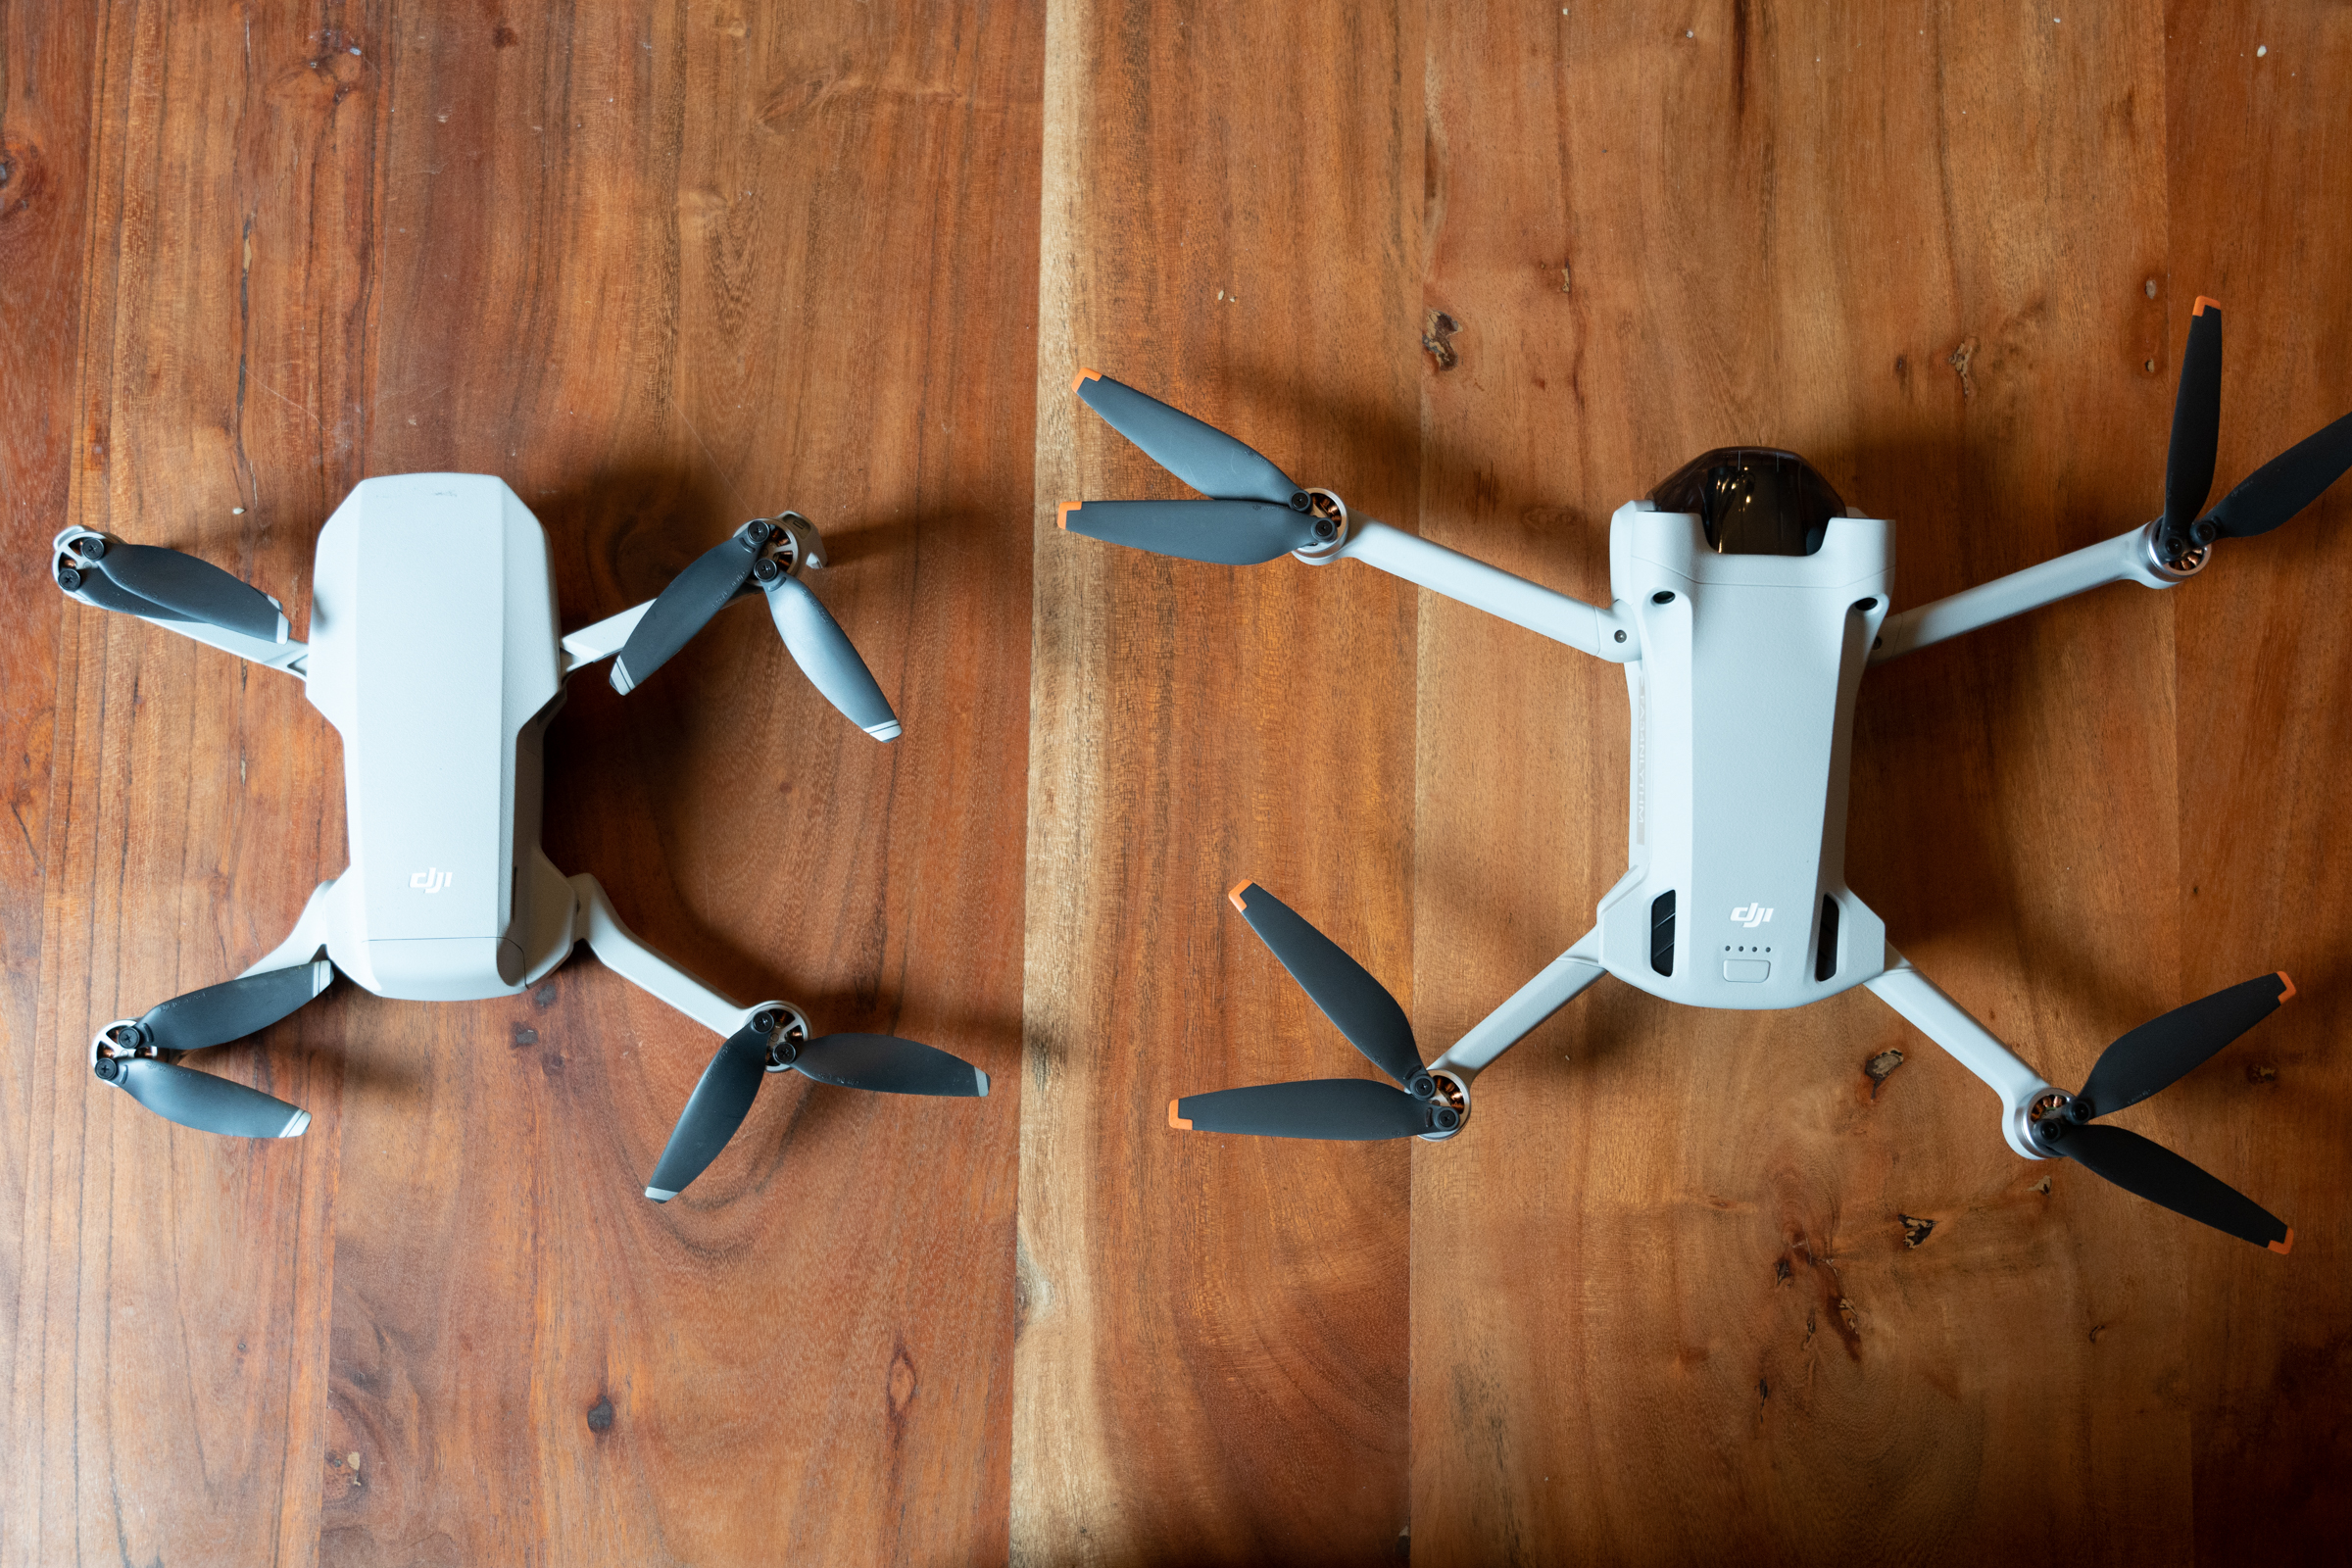 currency Or either Put together DJI's new Mini 3 Pro drone hits the aerial photography sweet spot |  TechCrunch